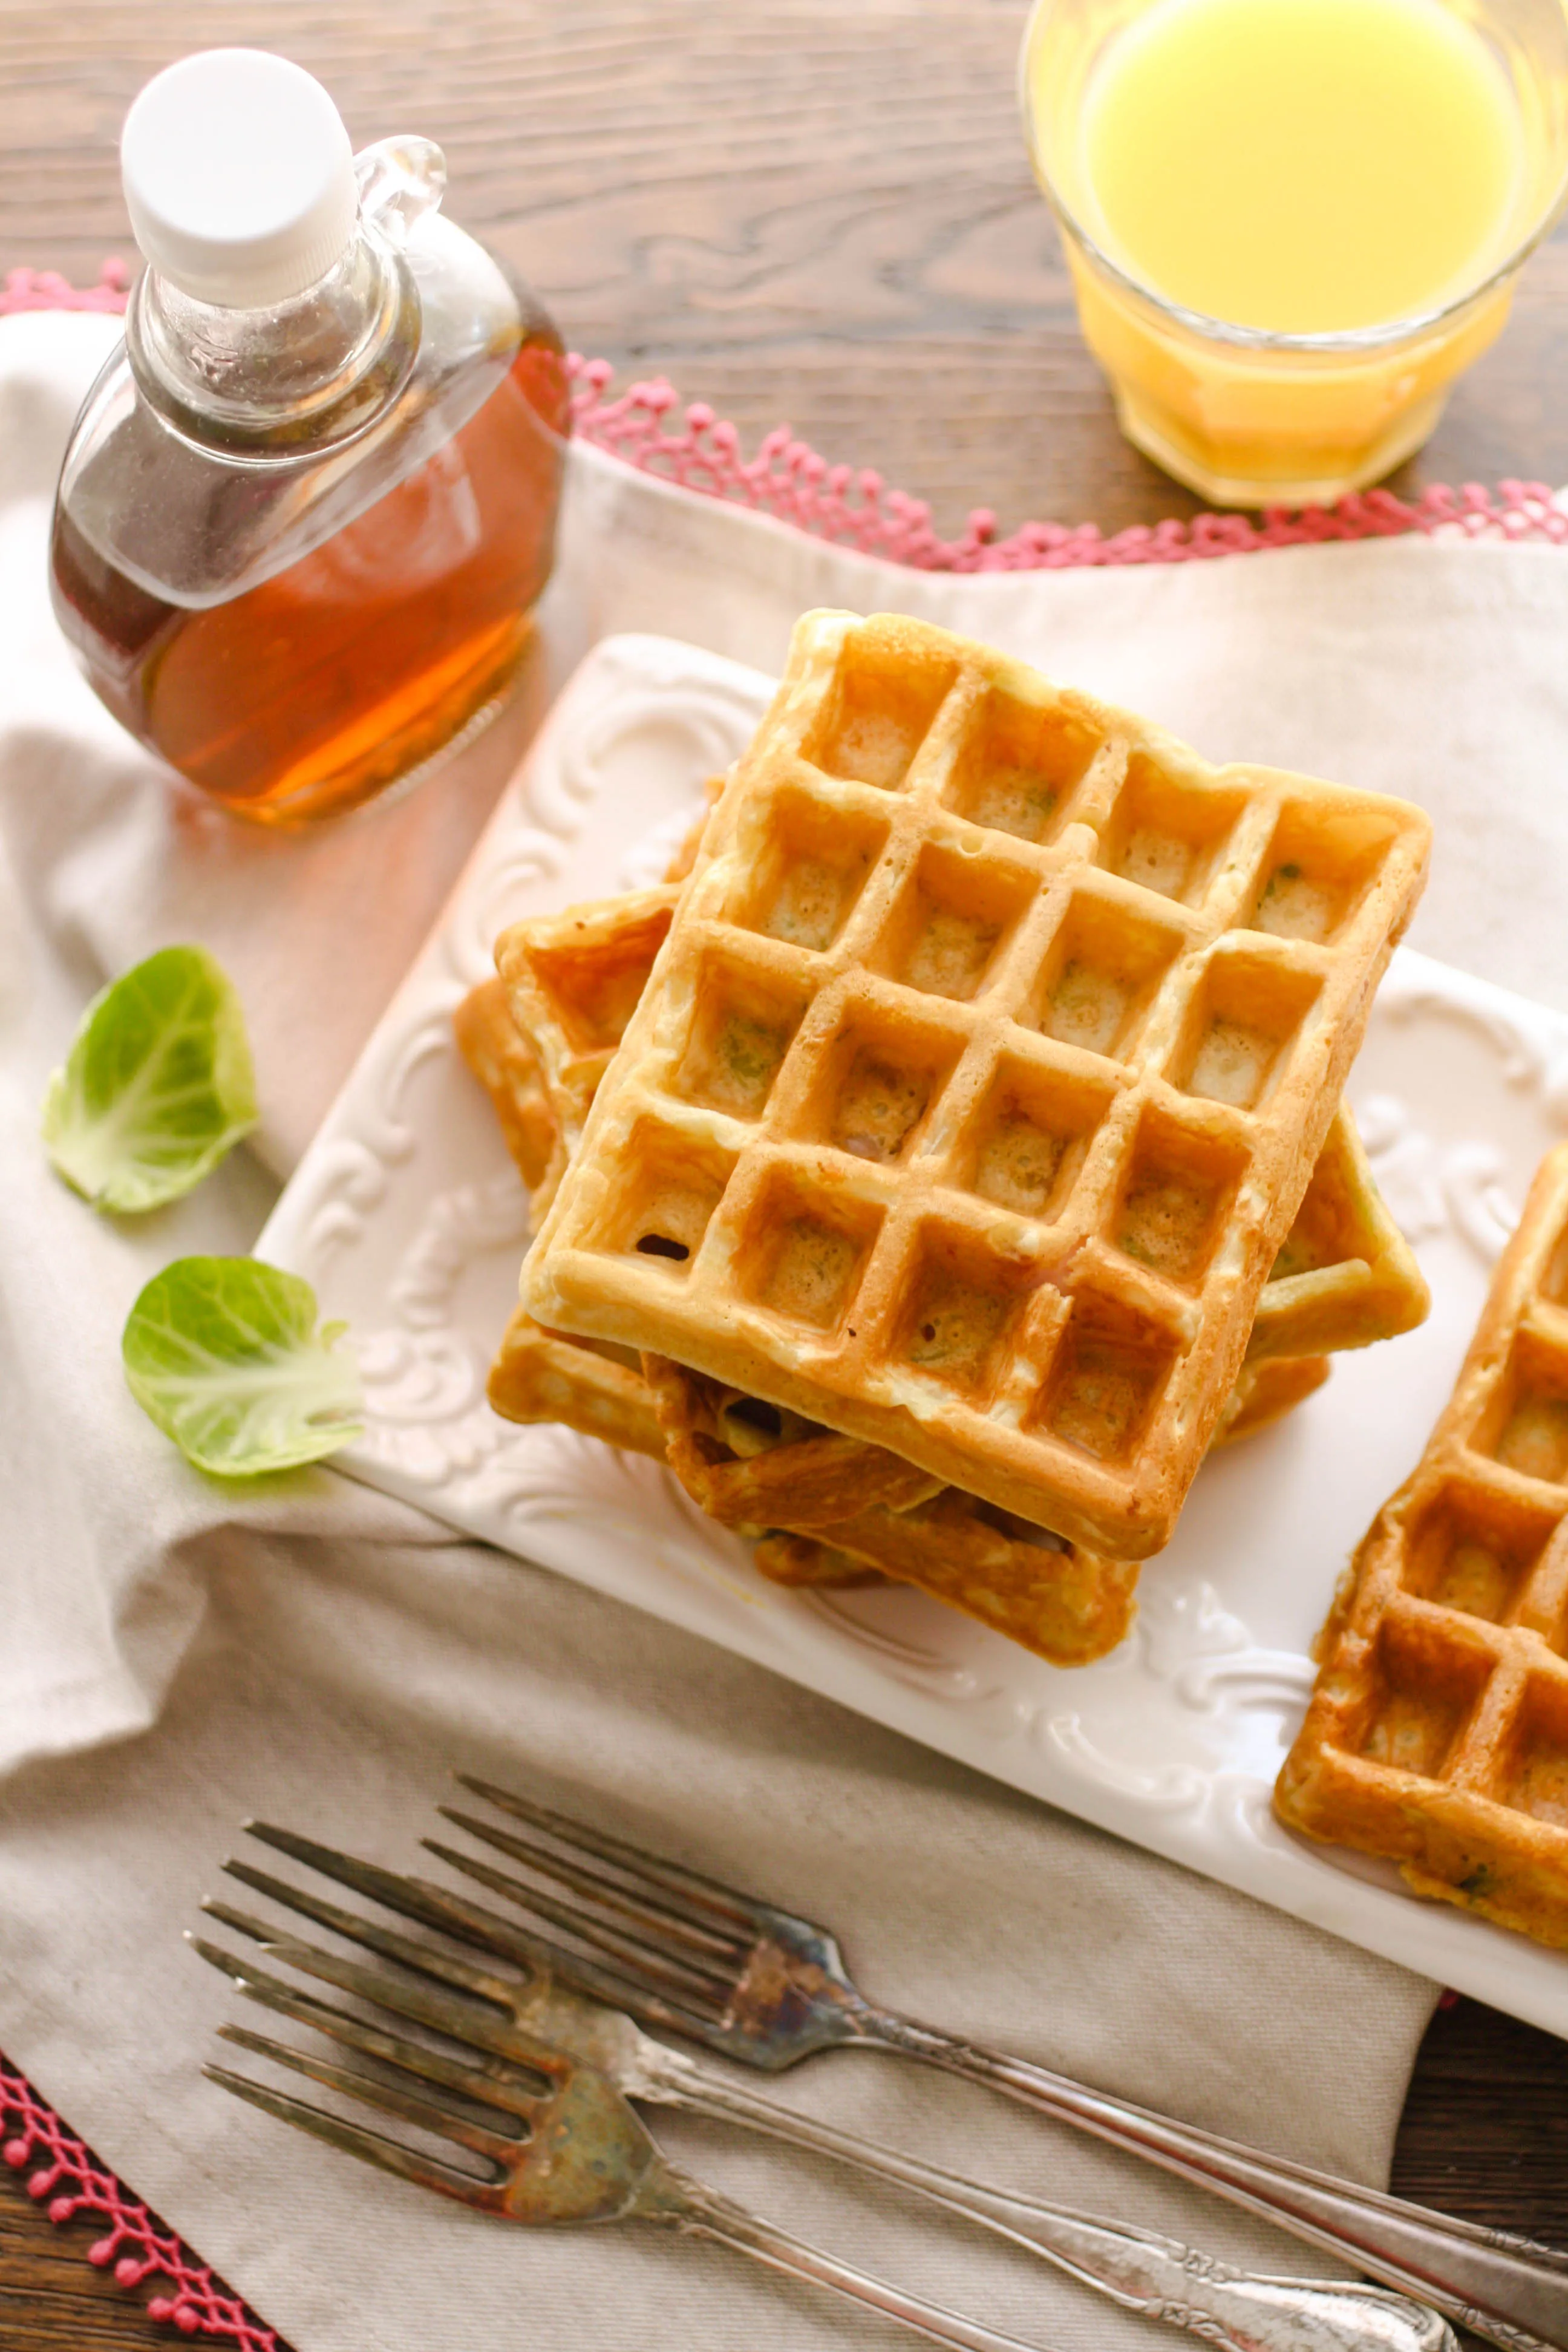 Savory waffles with ham, cheddar, and Brussels sprouts are perfect for any meal! The savory flavors go well with sweet maple syrup!